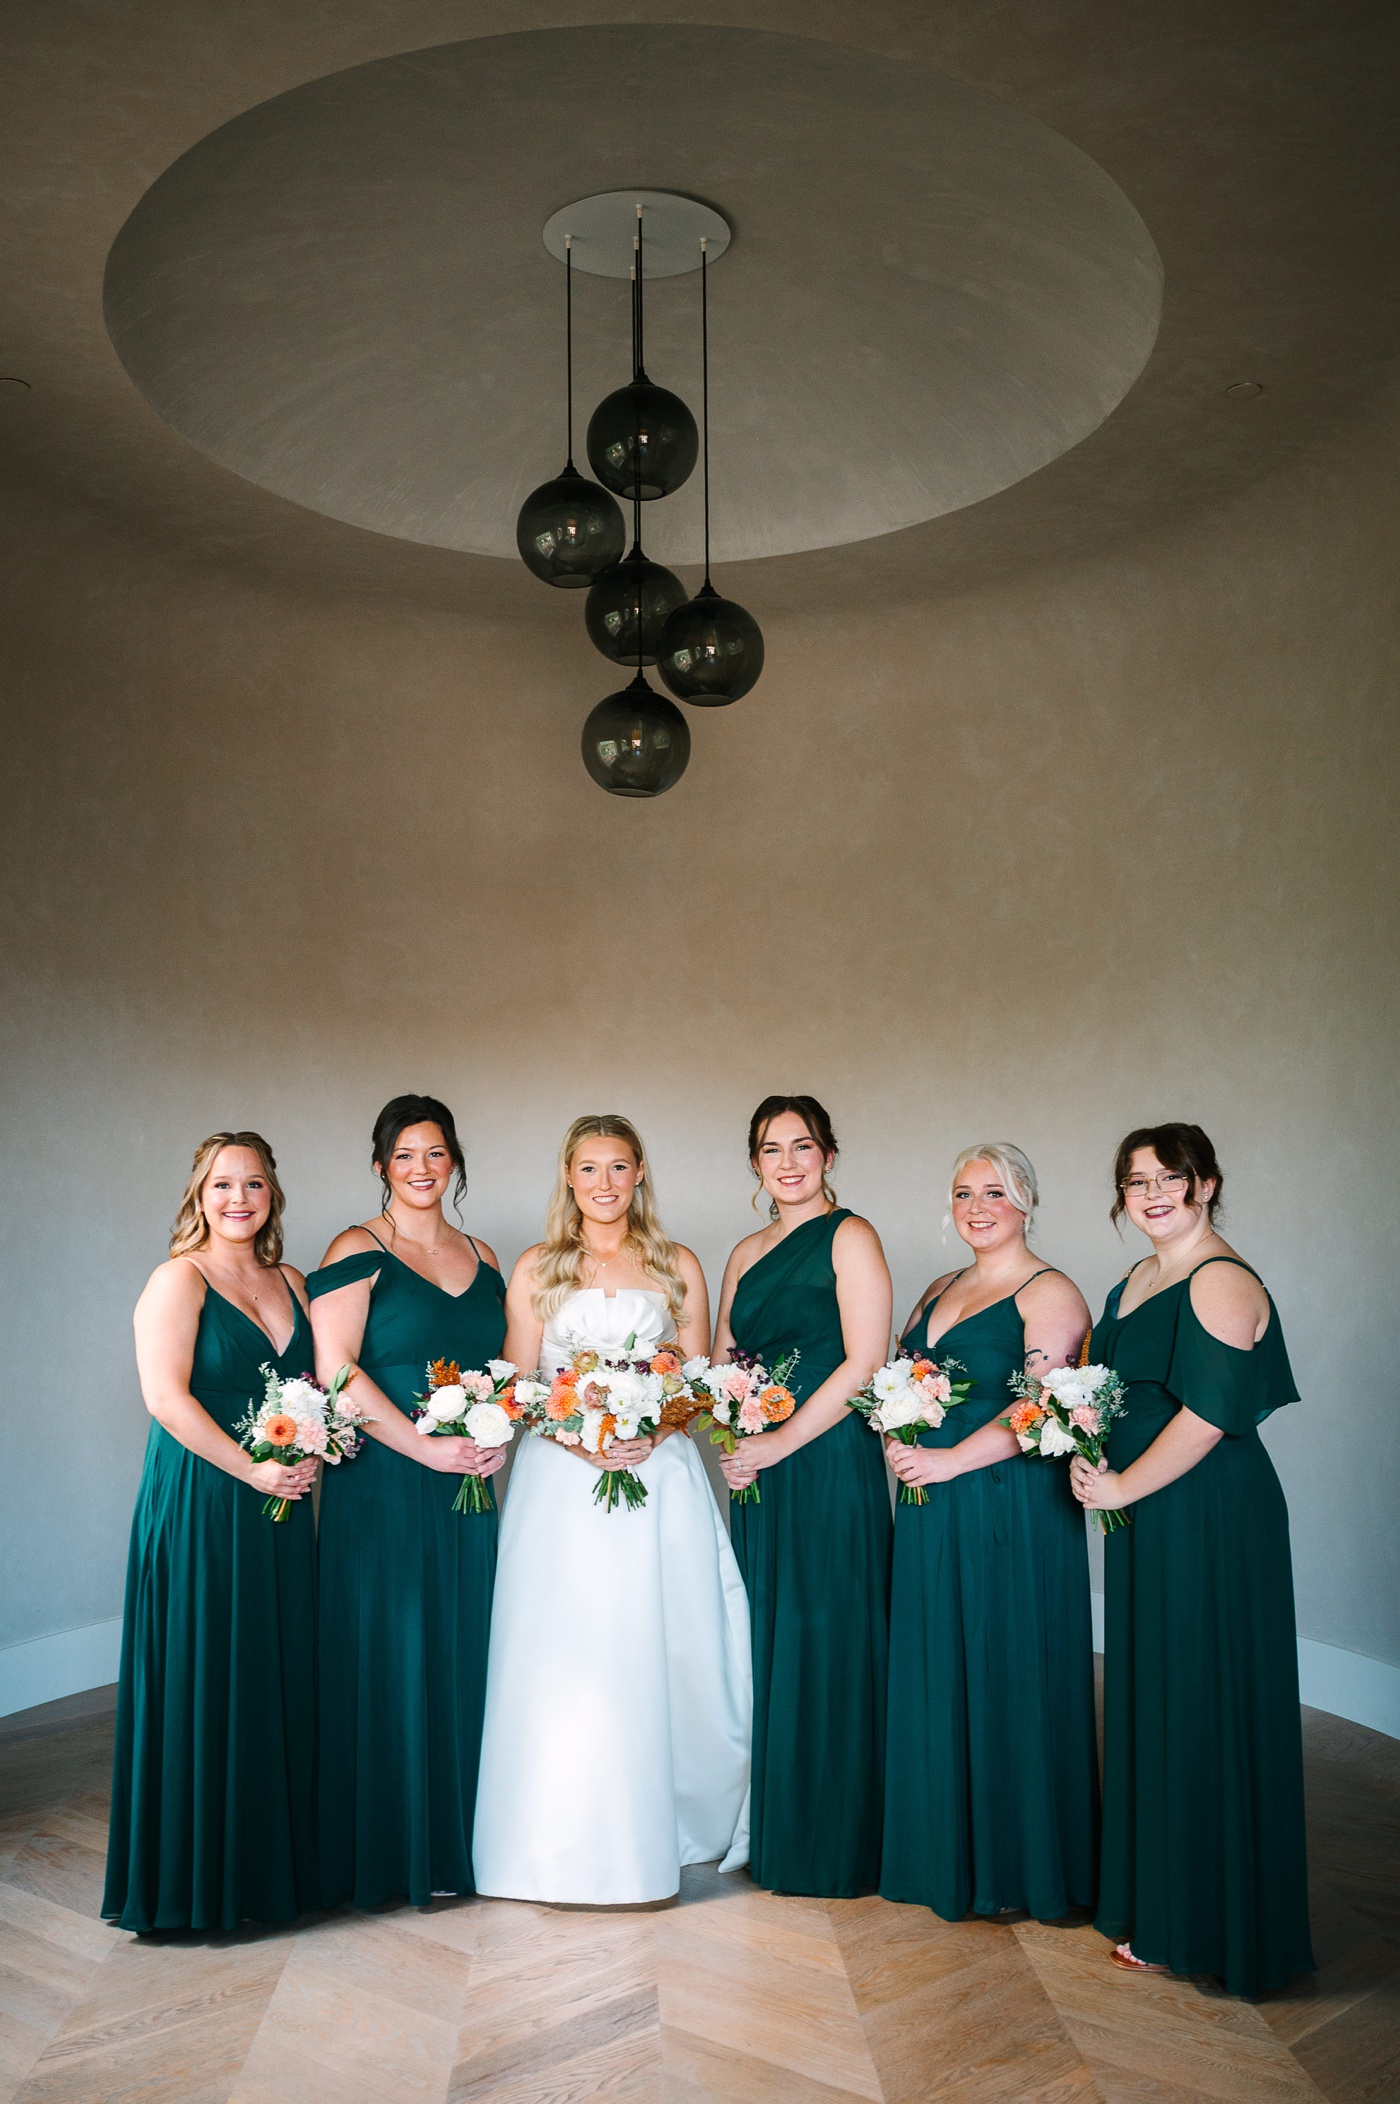 Bridal party portraits at the FAR Center for Contemporary Arts